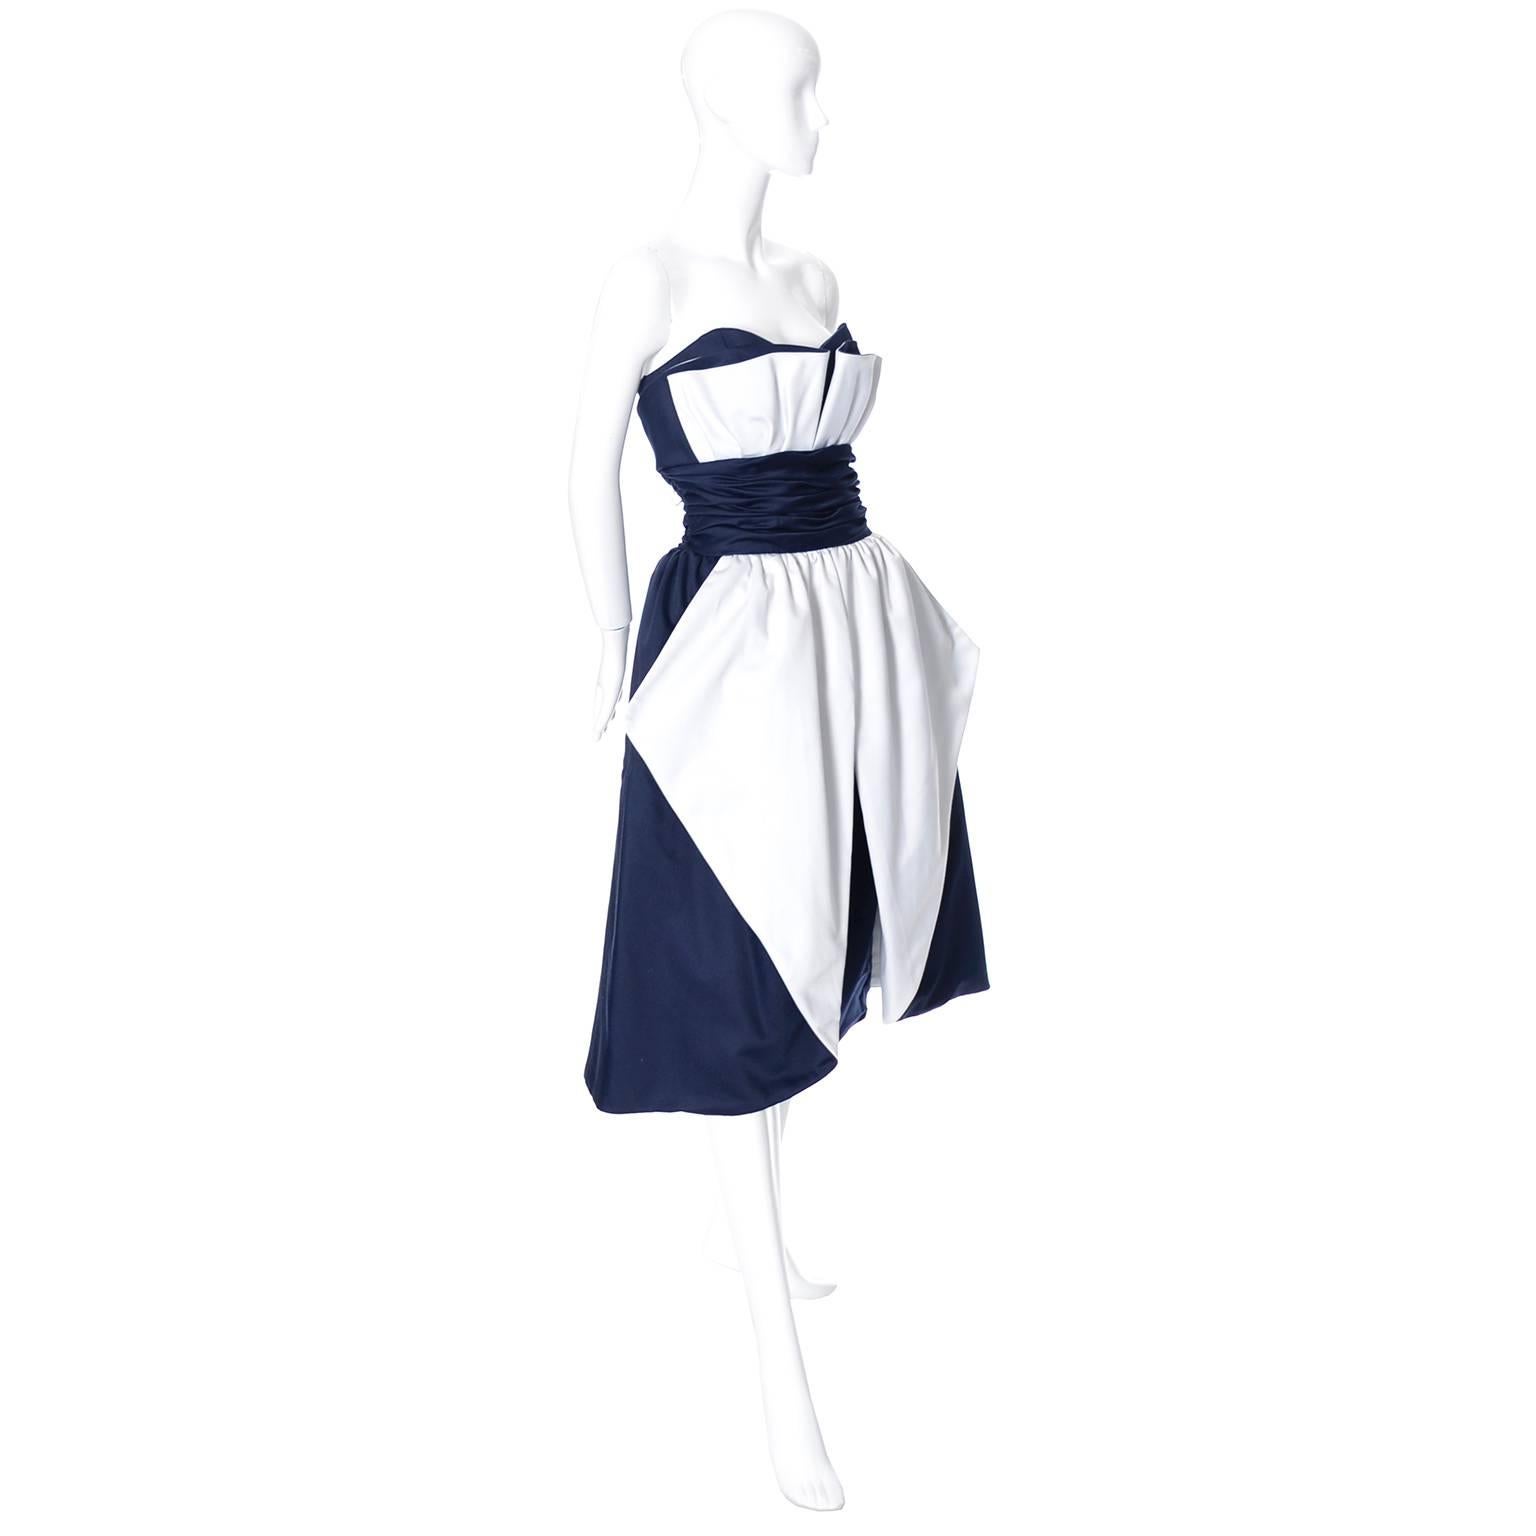 This pretty vintage dress was designed by Victor Costa for Neiman Marcus in the 1980's.  This strapless dress is deep blue with pretty white fabric dramatic details. There is a slim under skirt under the fuller 